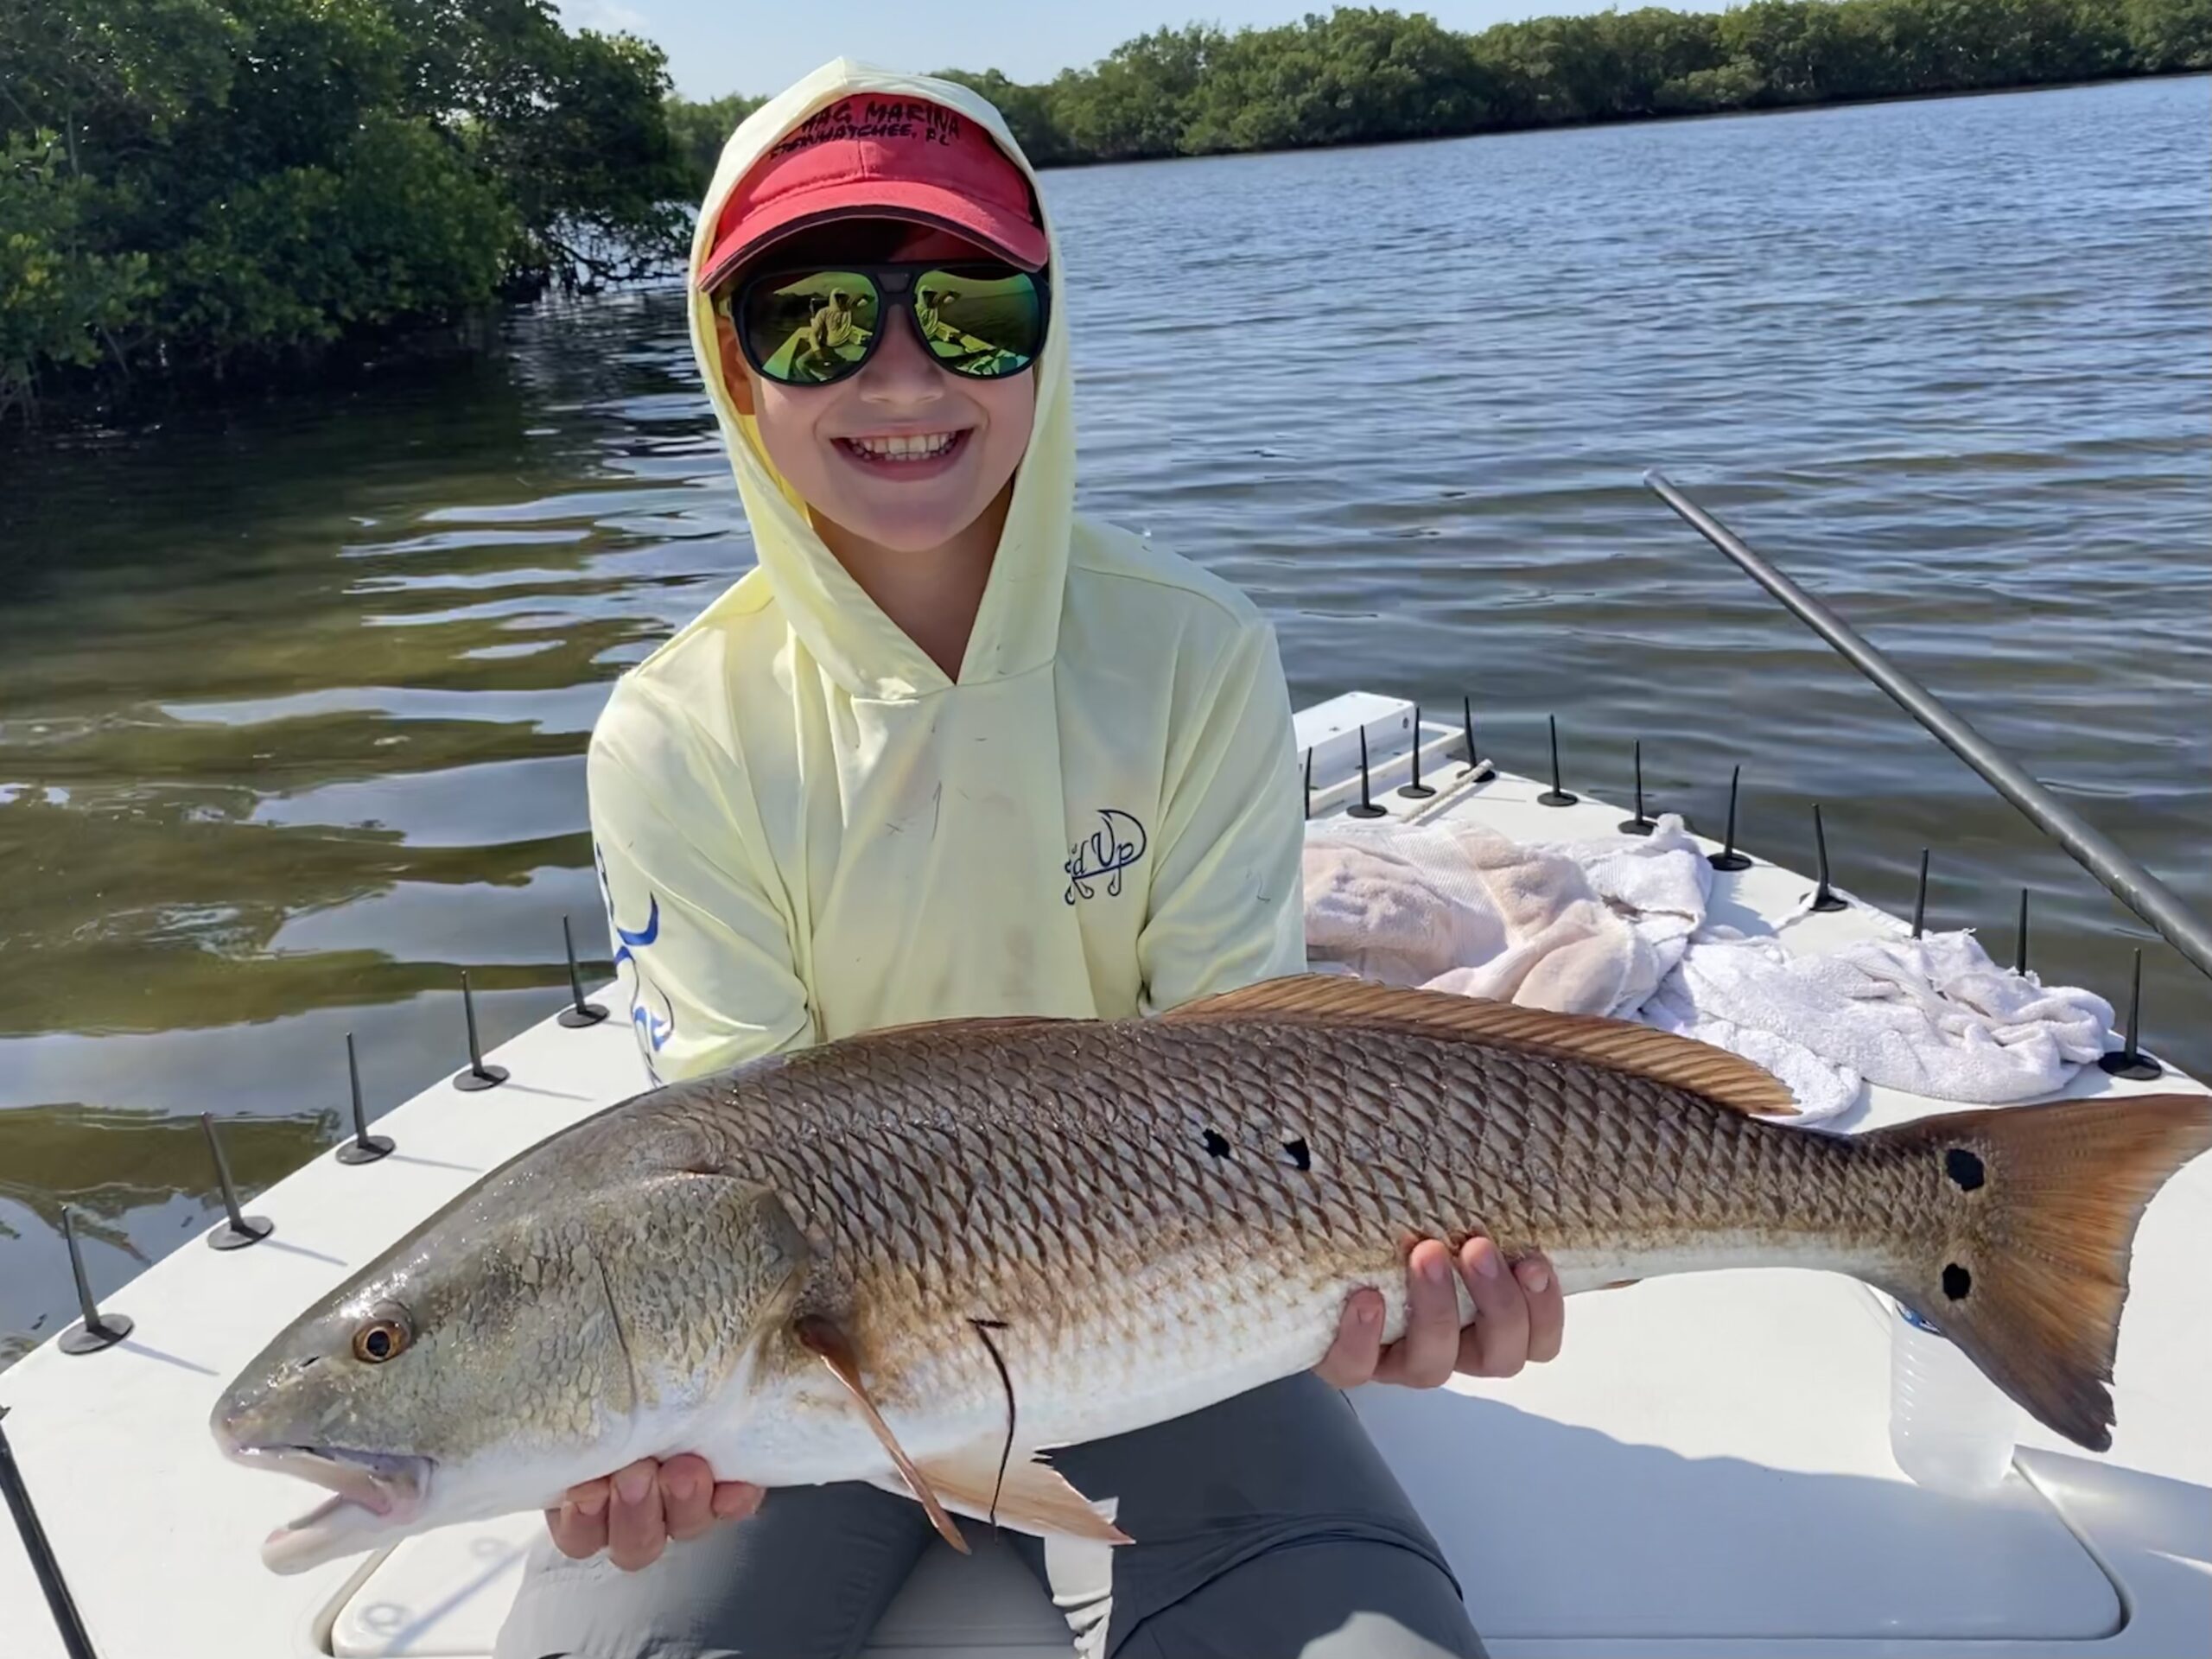 A young angler holds a nice redfish up for the camera